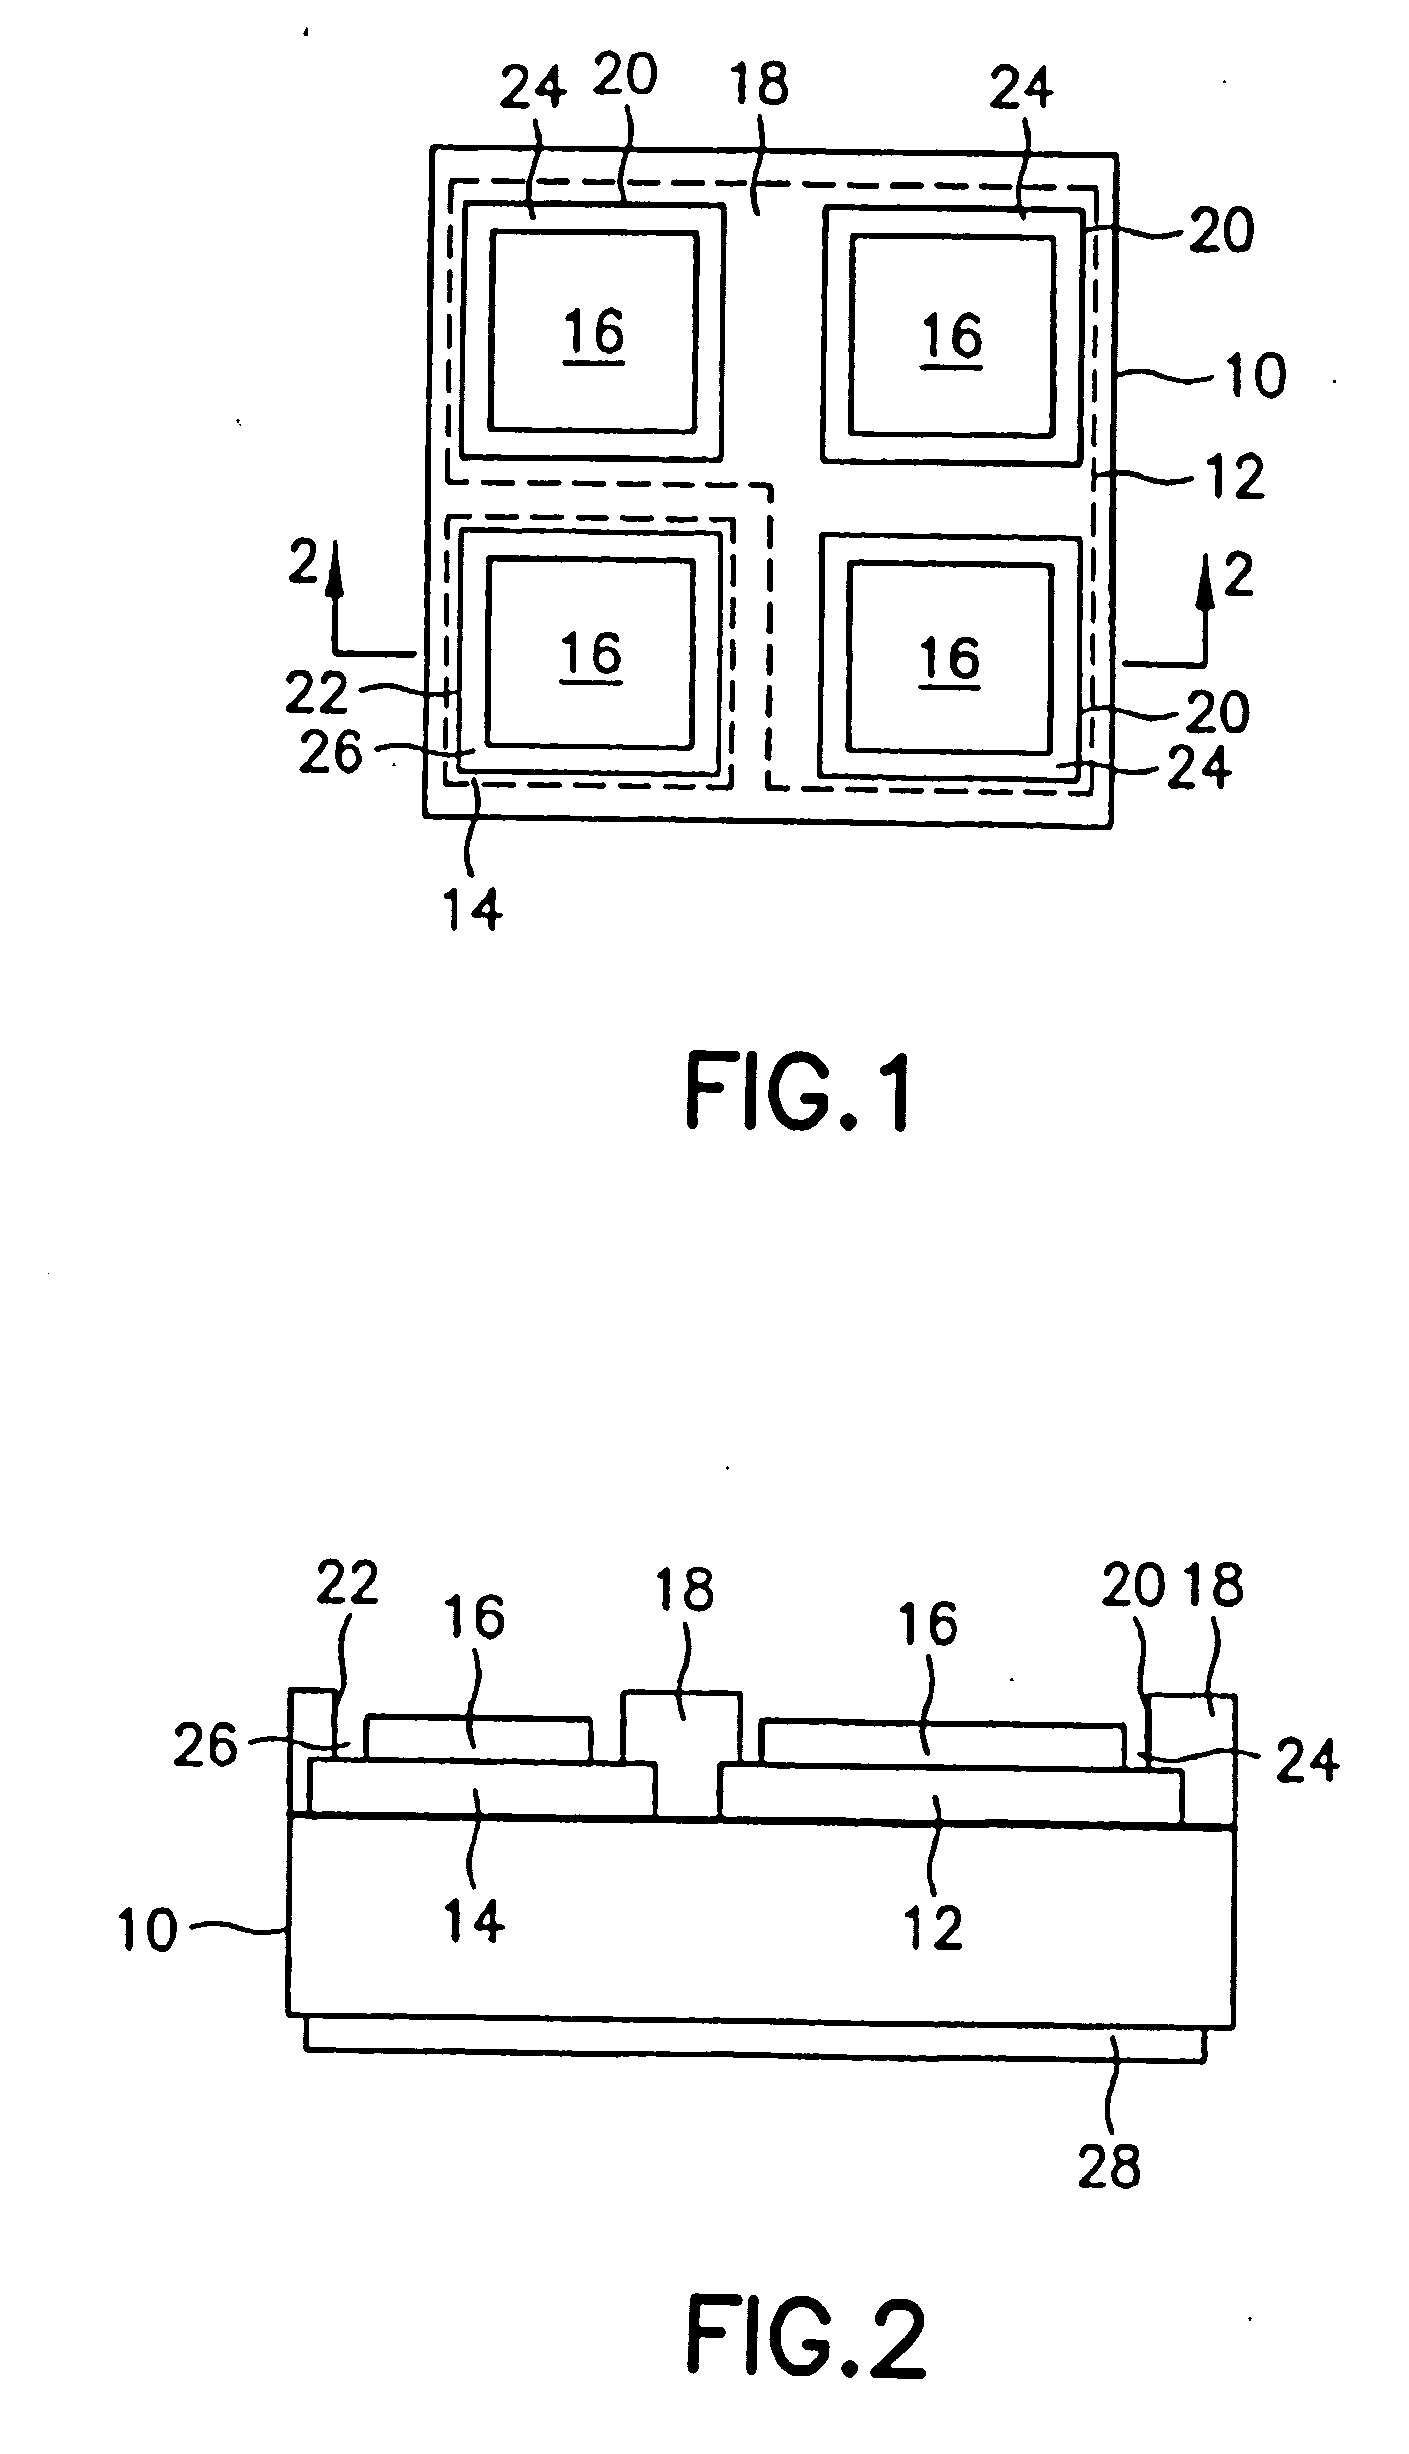 Semiconductor package fabrication